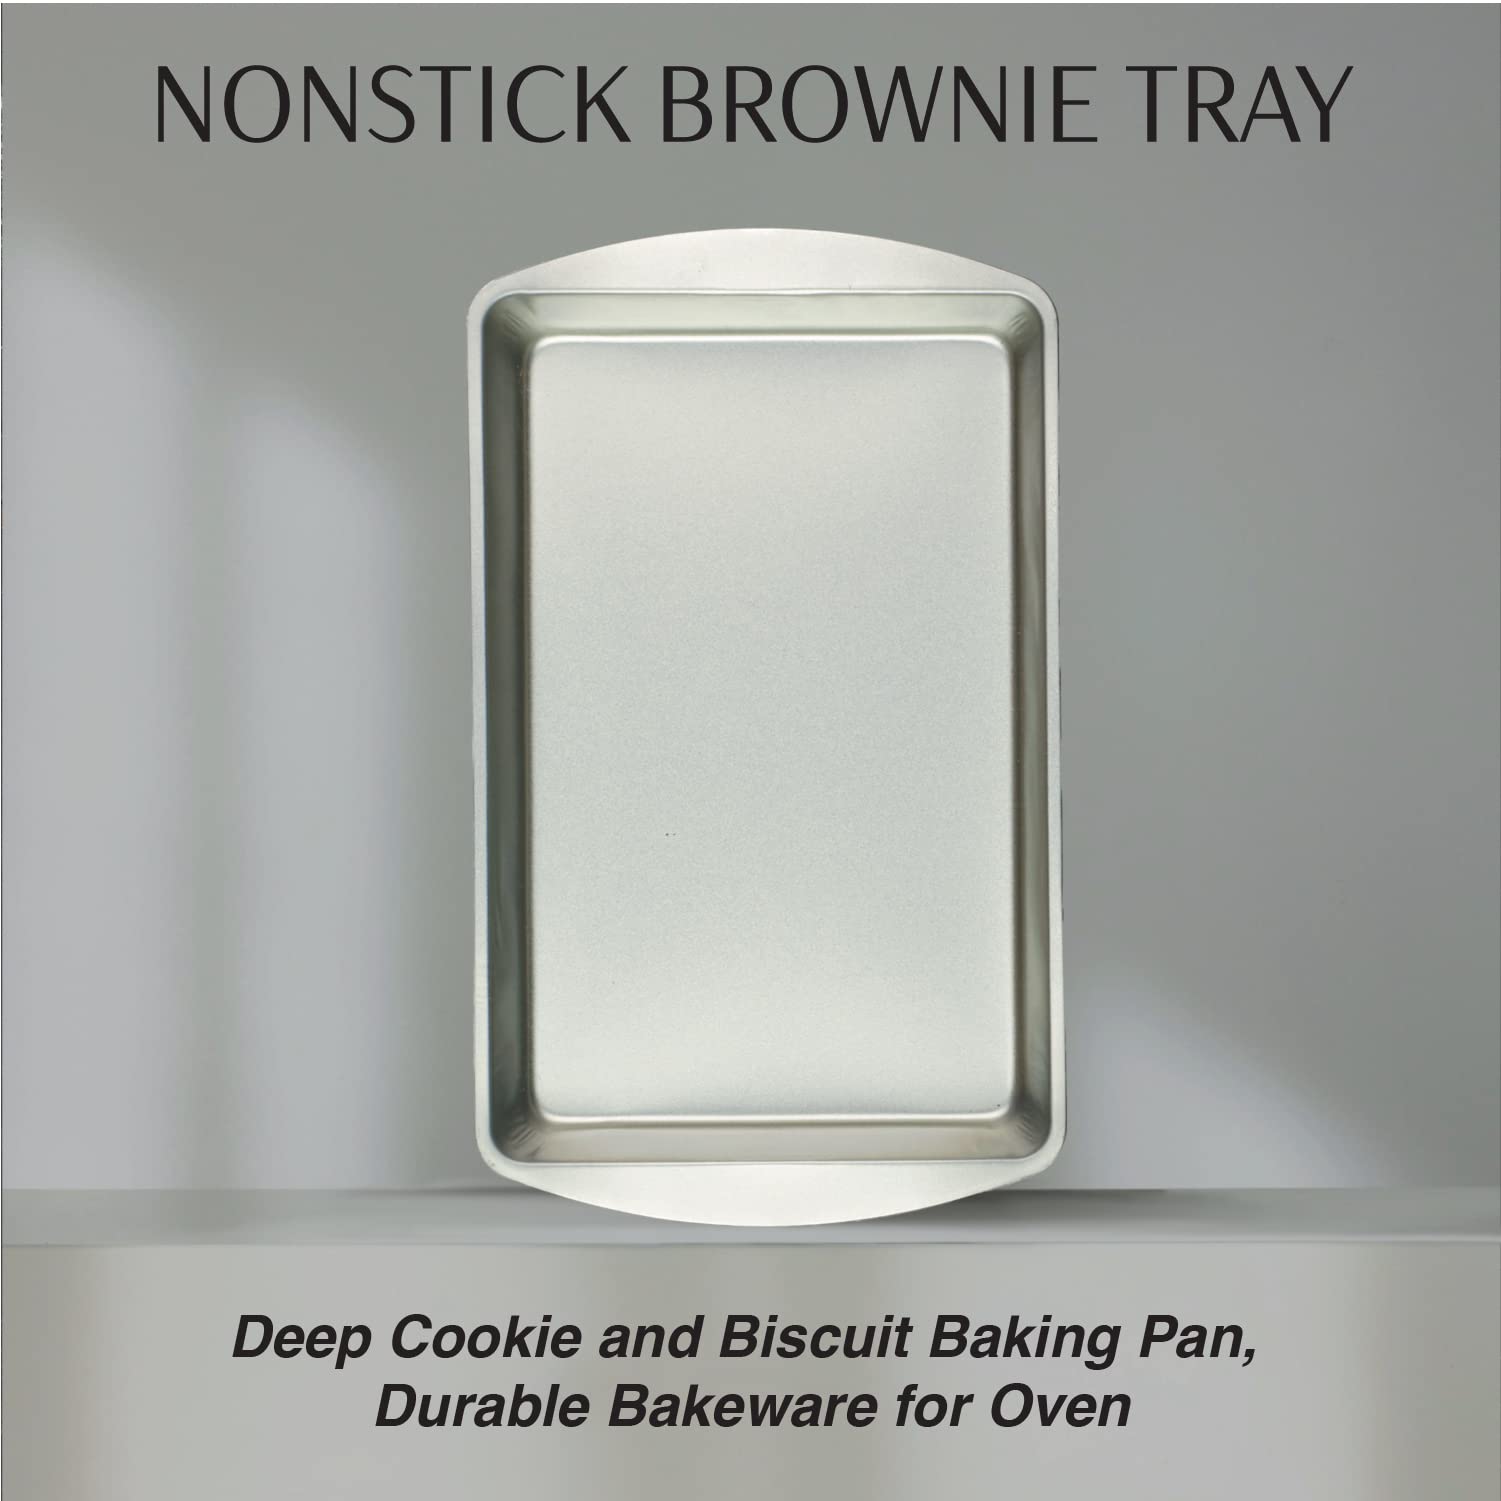 DecorRack 12.8 x 7.5 Inch Nonstick Brownie Tray, Deep Cookie And Biscuit Baking Pan, Durable Bakeware For Oven